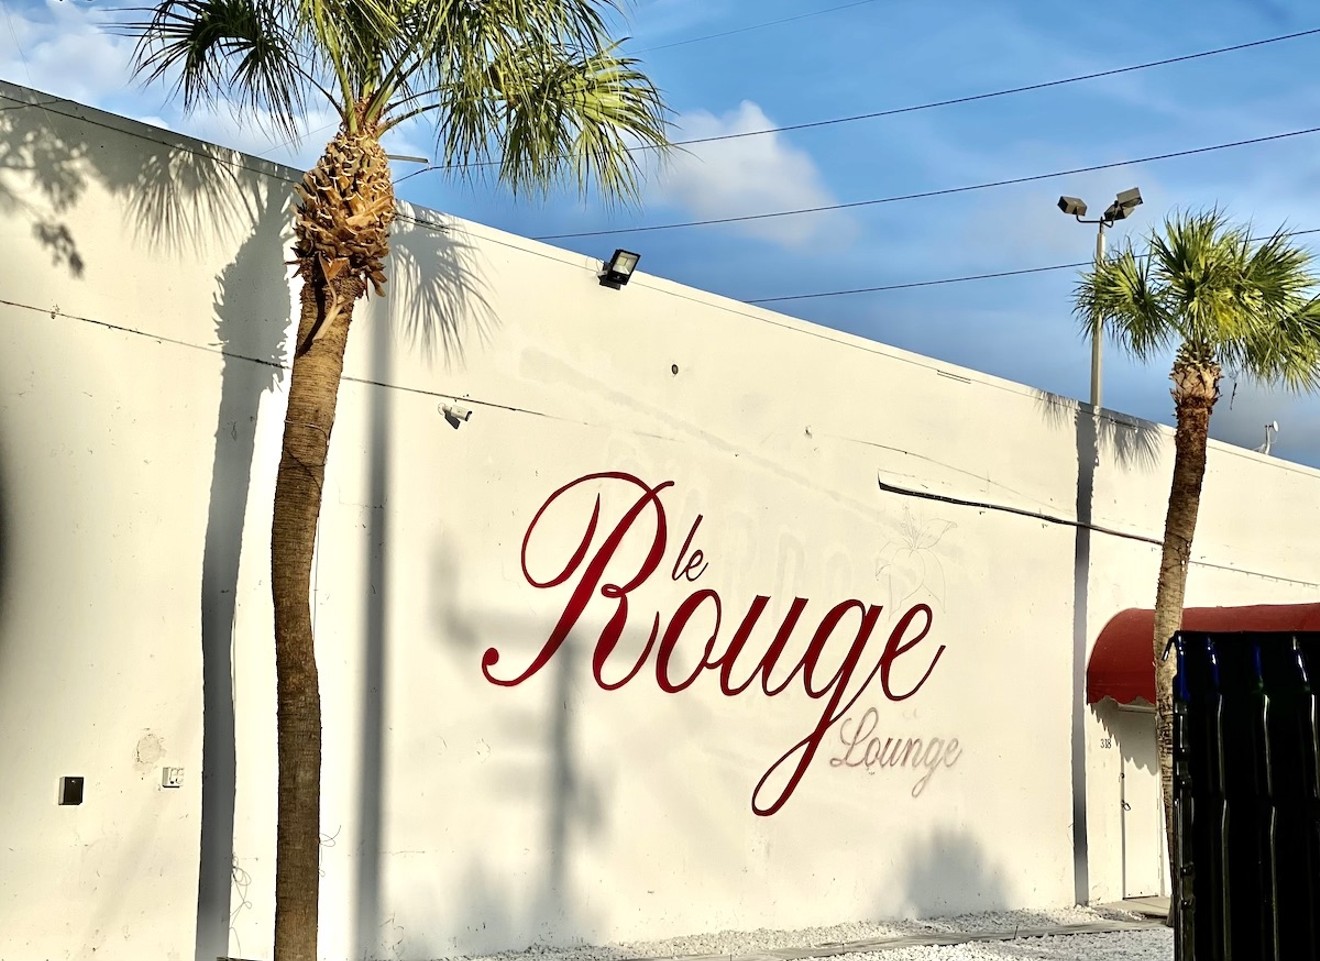 A French cabaret-inspired nightlife venue, Le Rouge, will open in Wynwood this June.